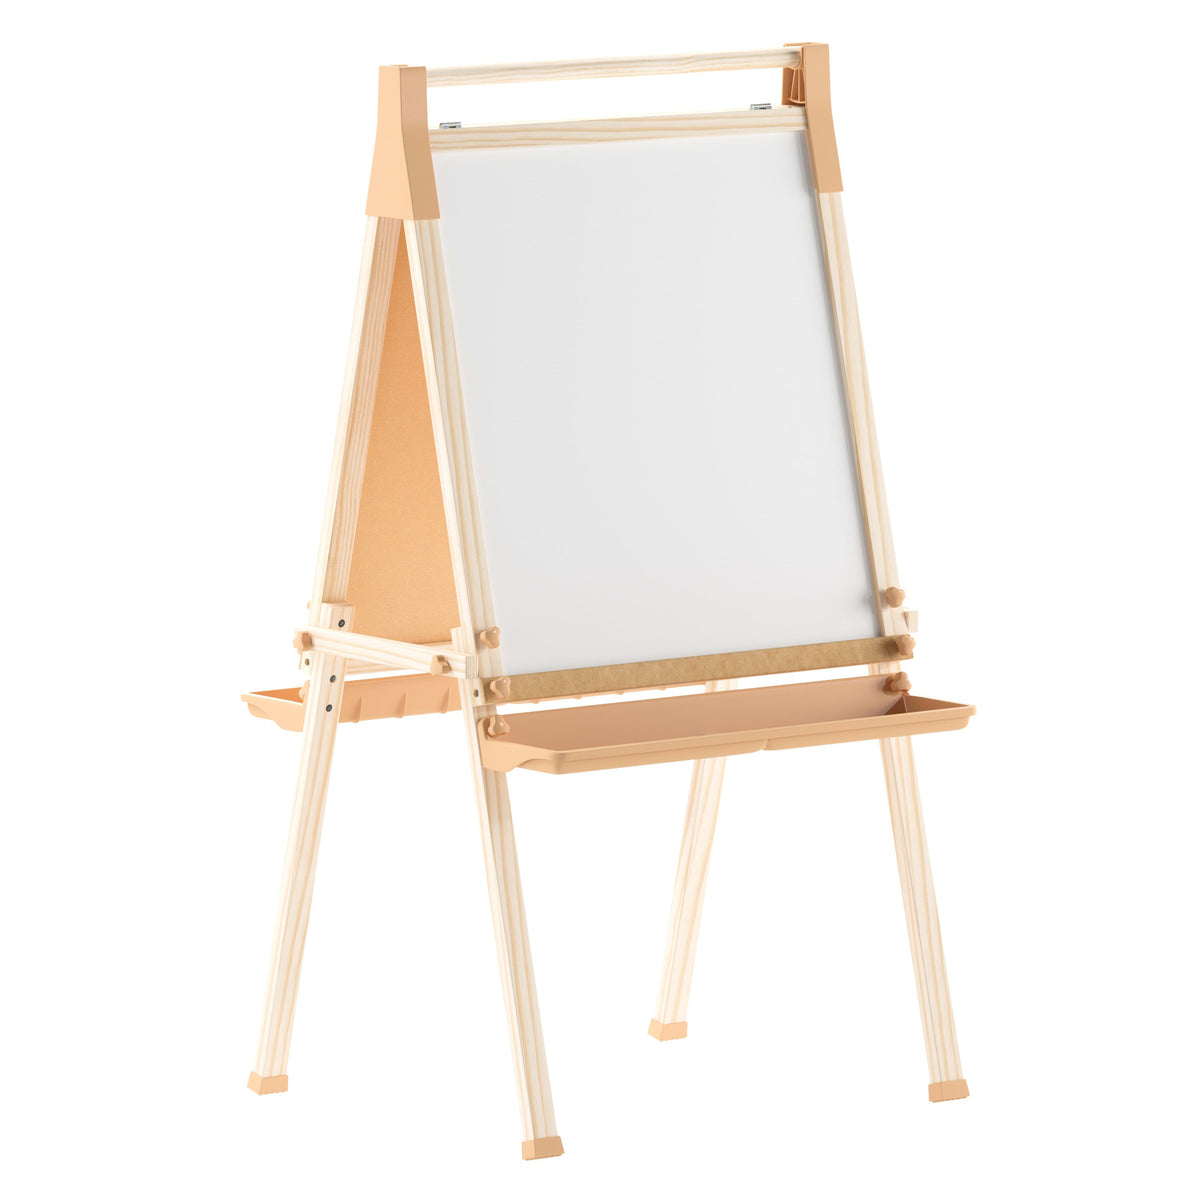 Commercial Wooden Standing Art Easel with Chalkboard & Dry Erase Board-Natural